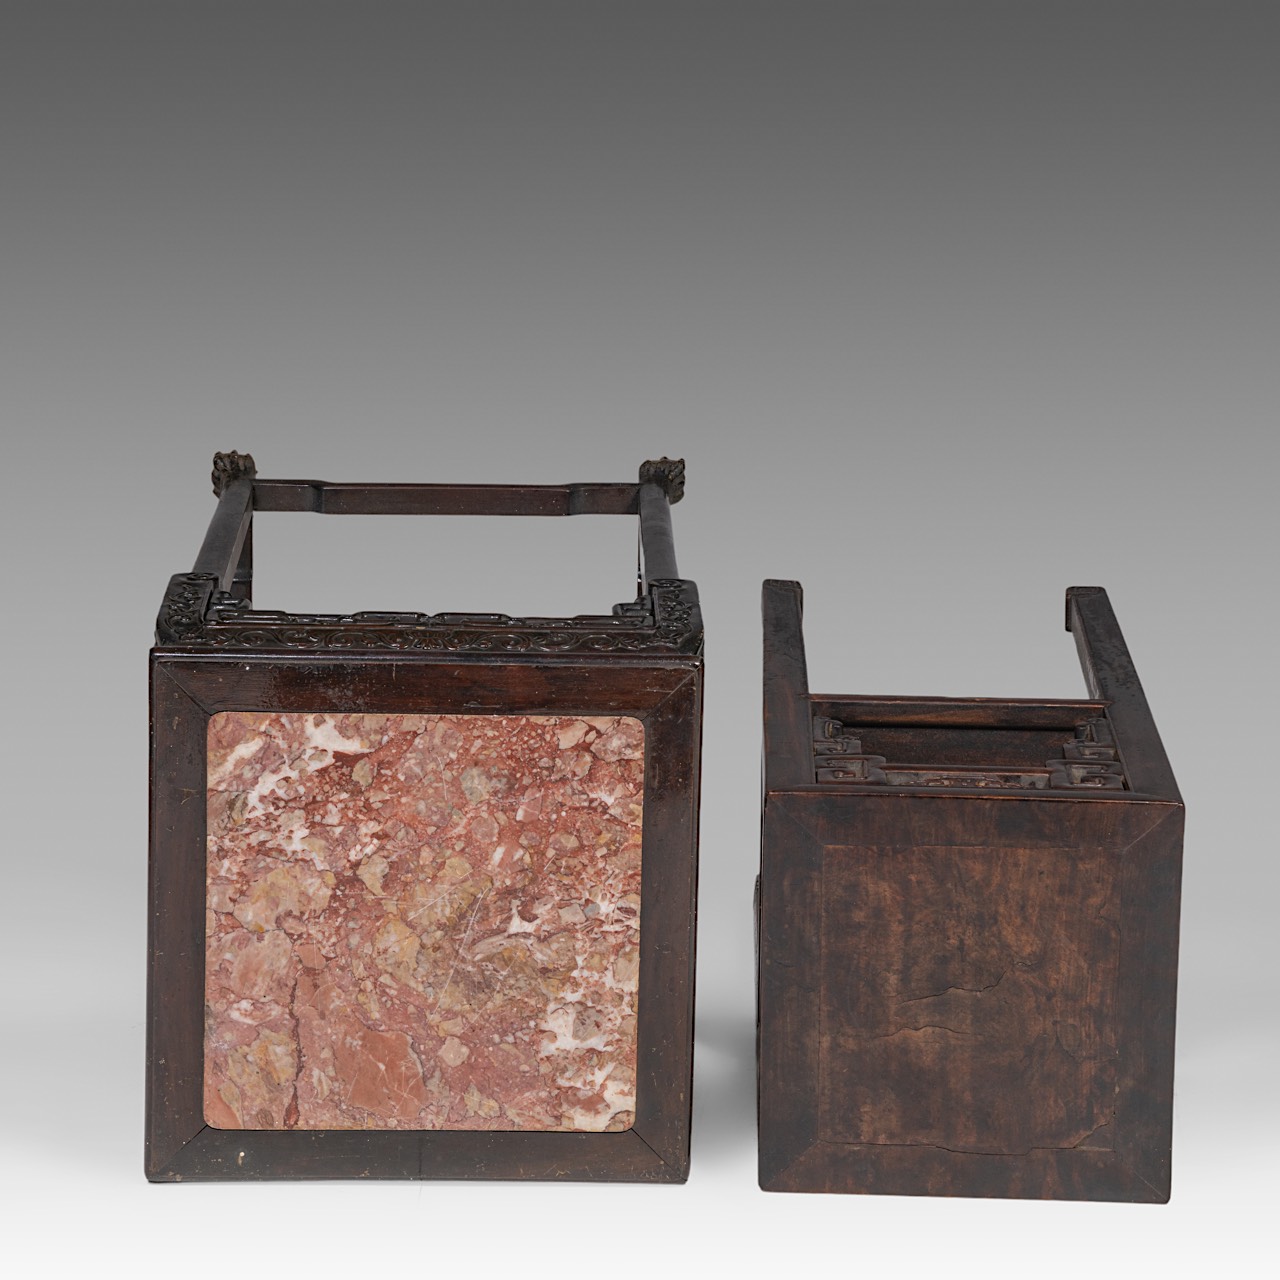 Two South-Chinese carved hardwood bases, one with a marble top, late Qing, largest H 82 - 48 x 48 cm - Image 6 of 7